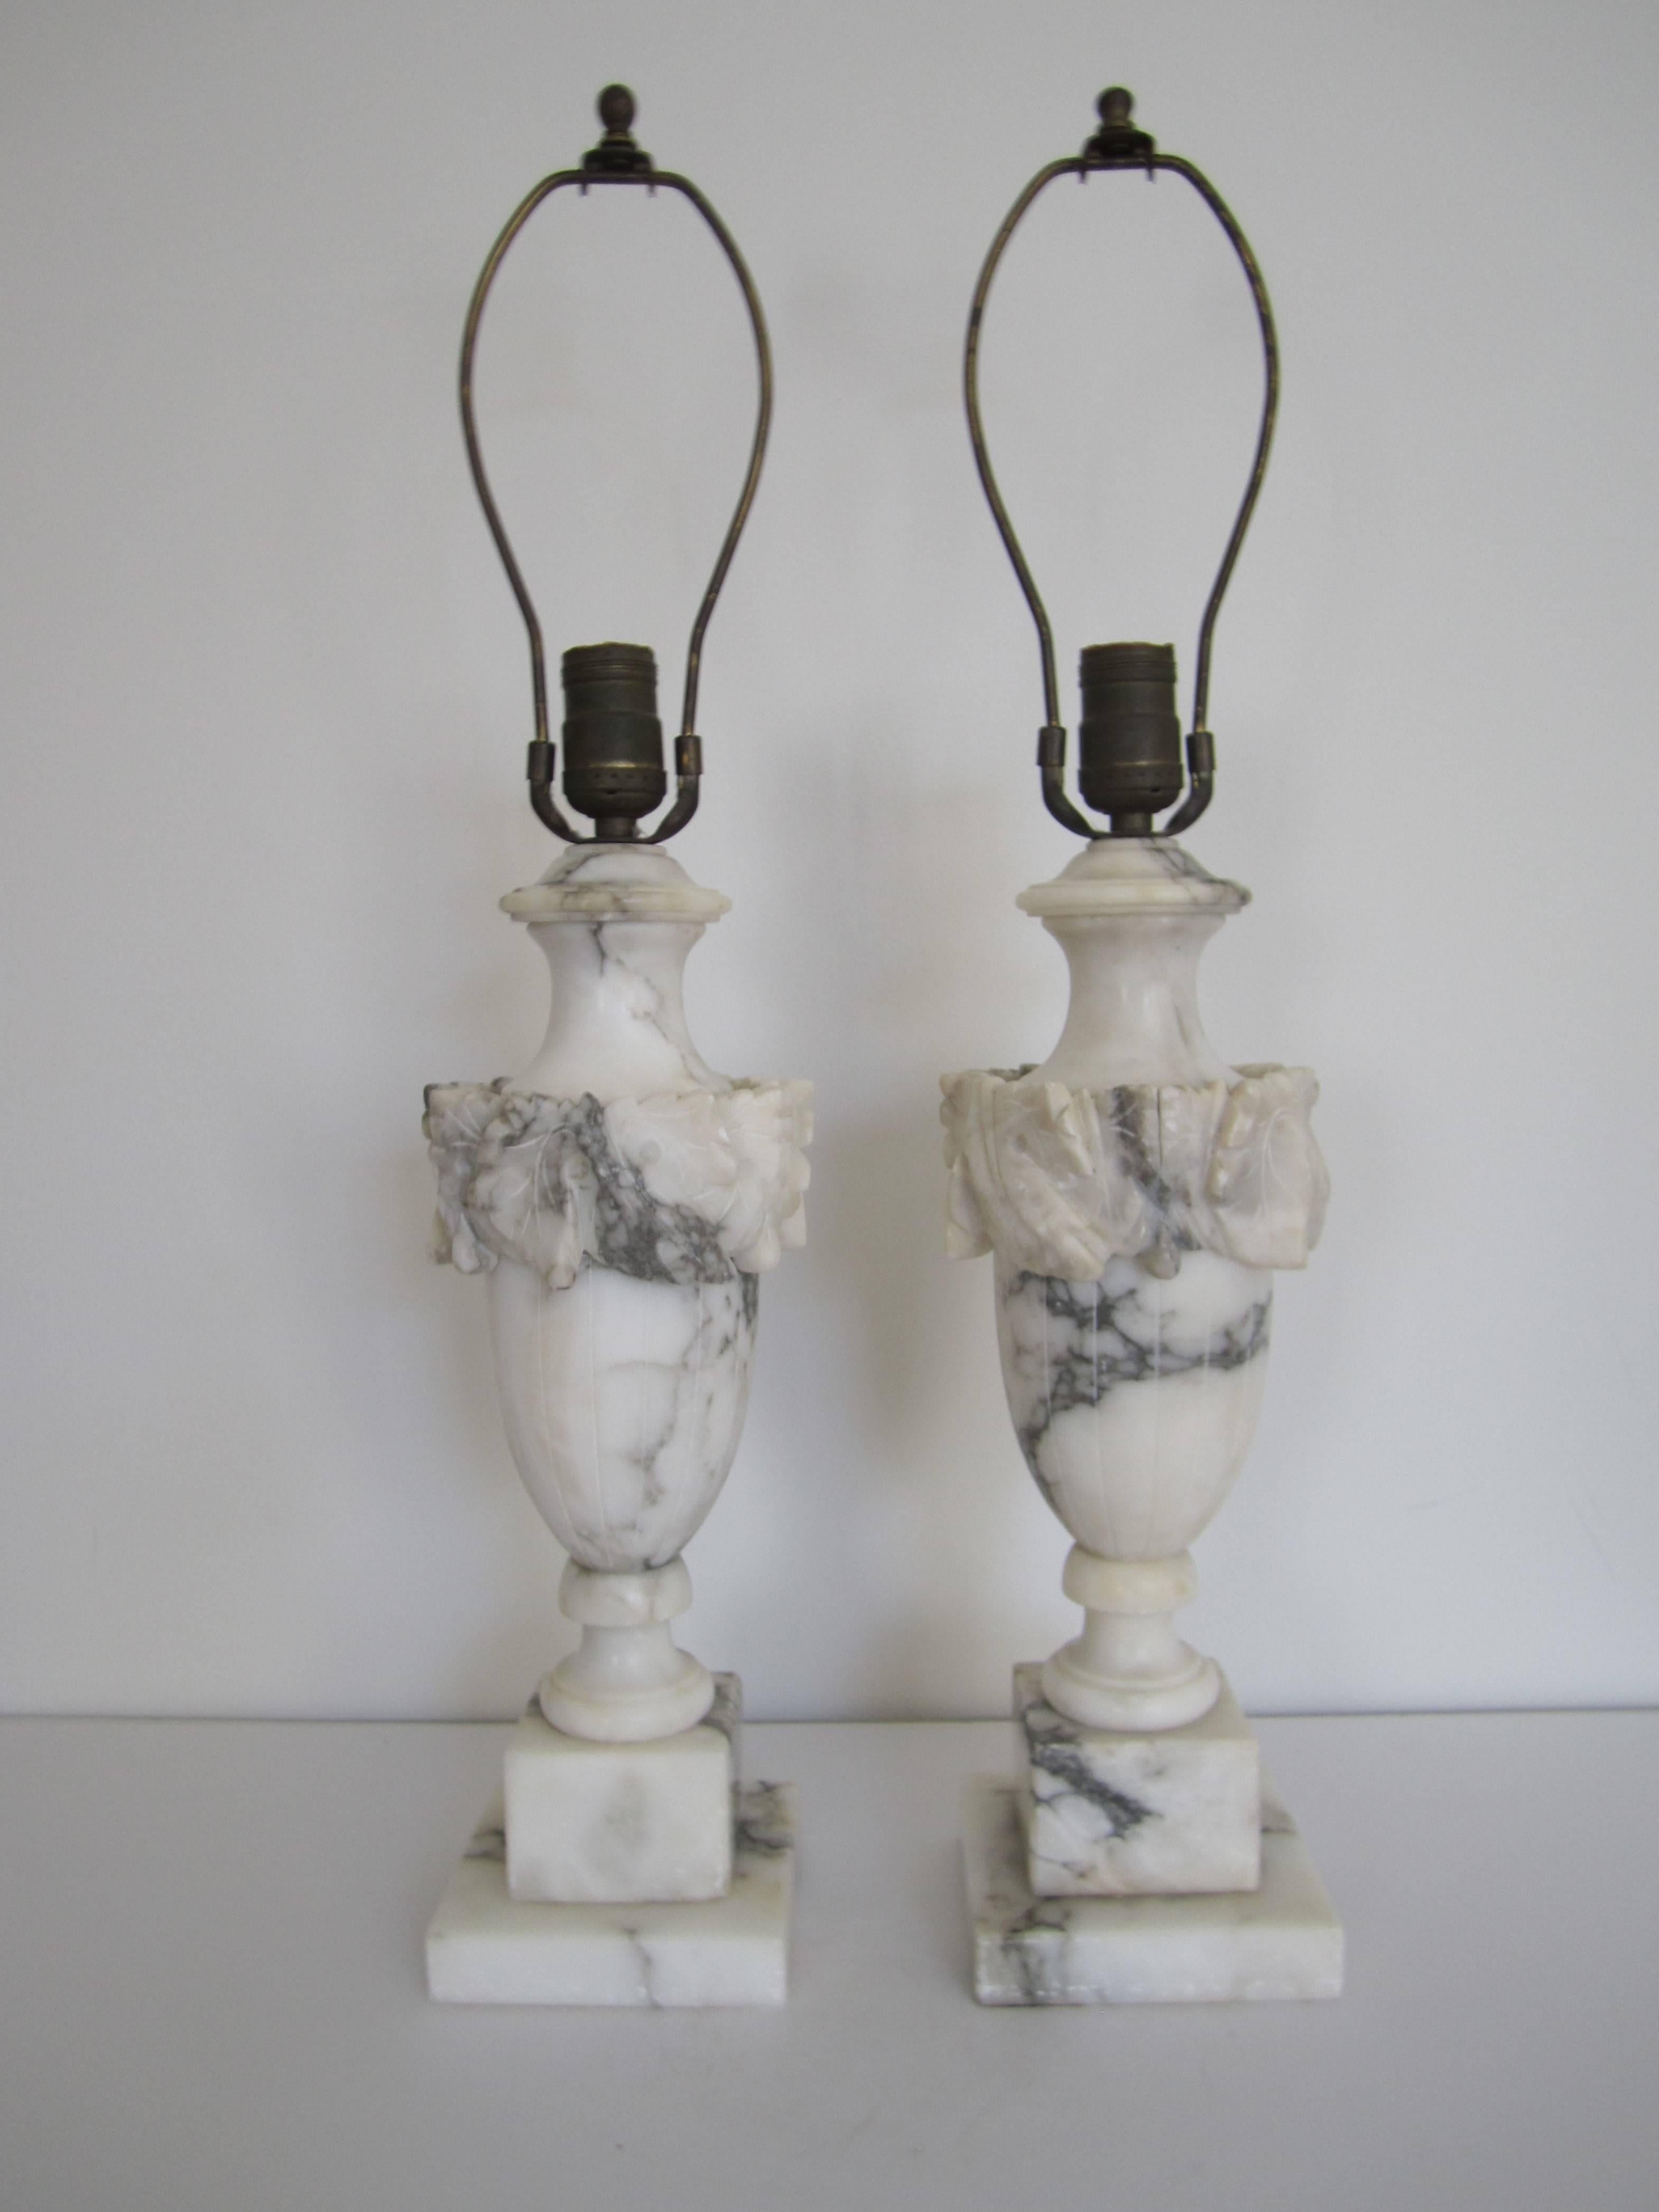 A beautiful pair of Italian Neoclassical style urn form carved solid Carrara marble table lamps, circa early 20th Century, Italy. Marble (Carrara marble) is predominantly white with black and gray veining throughout. Shown with black shade and white